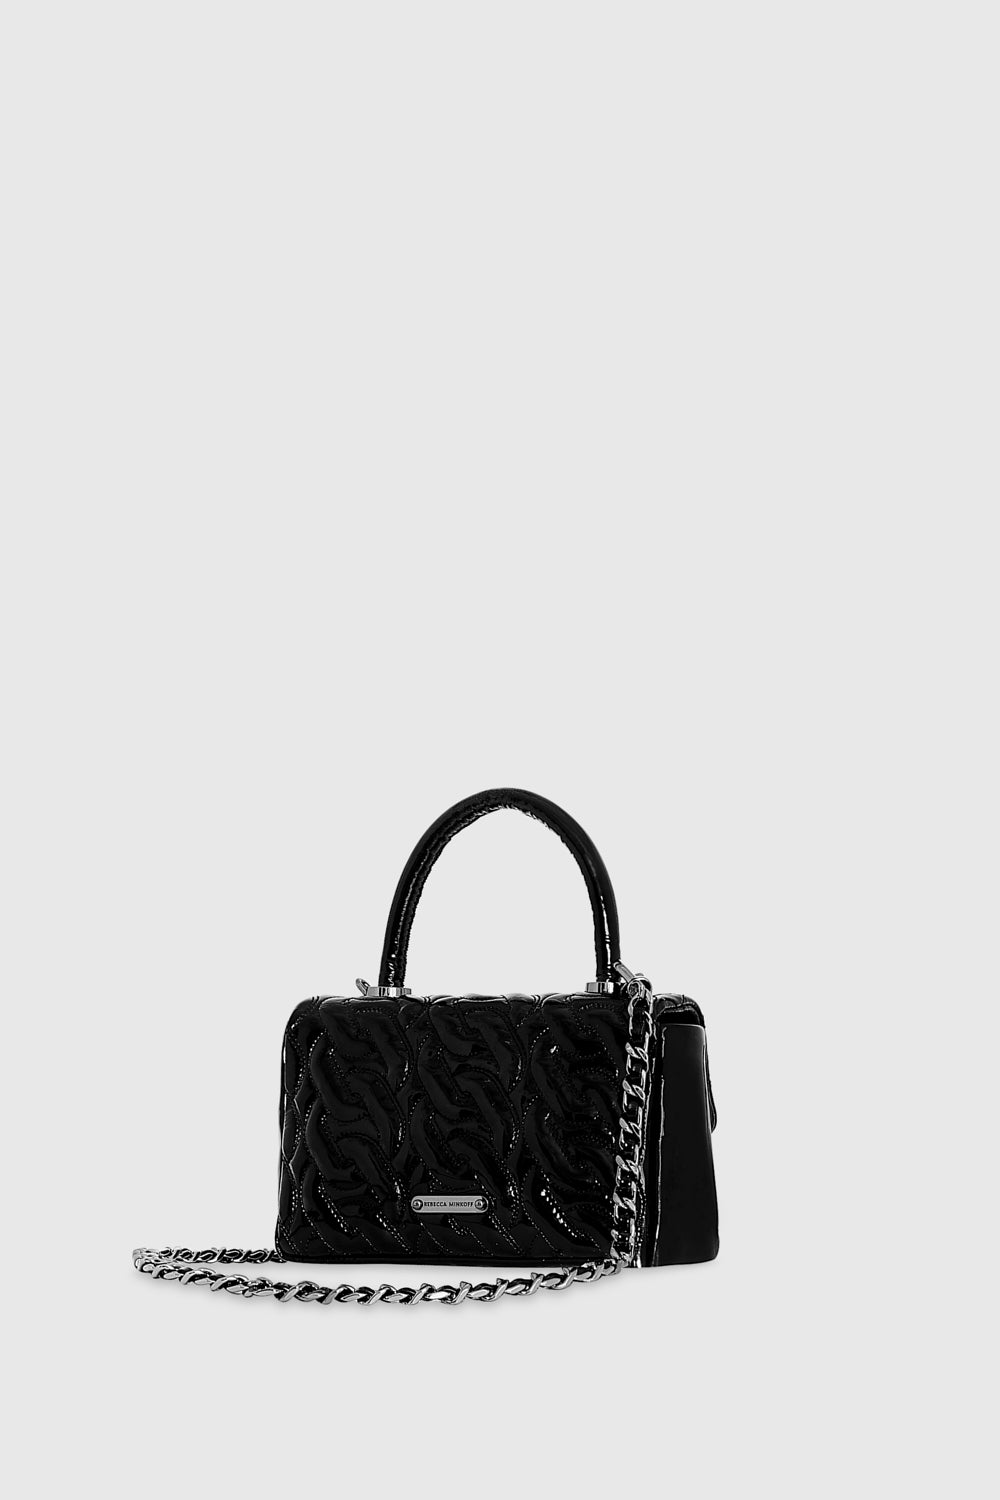 Guess - Luxe Leather Handbag 